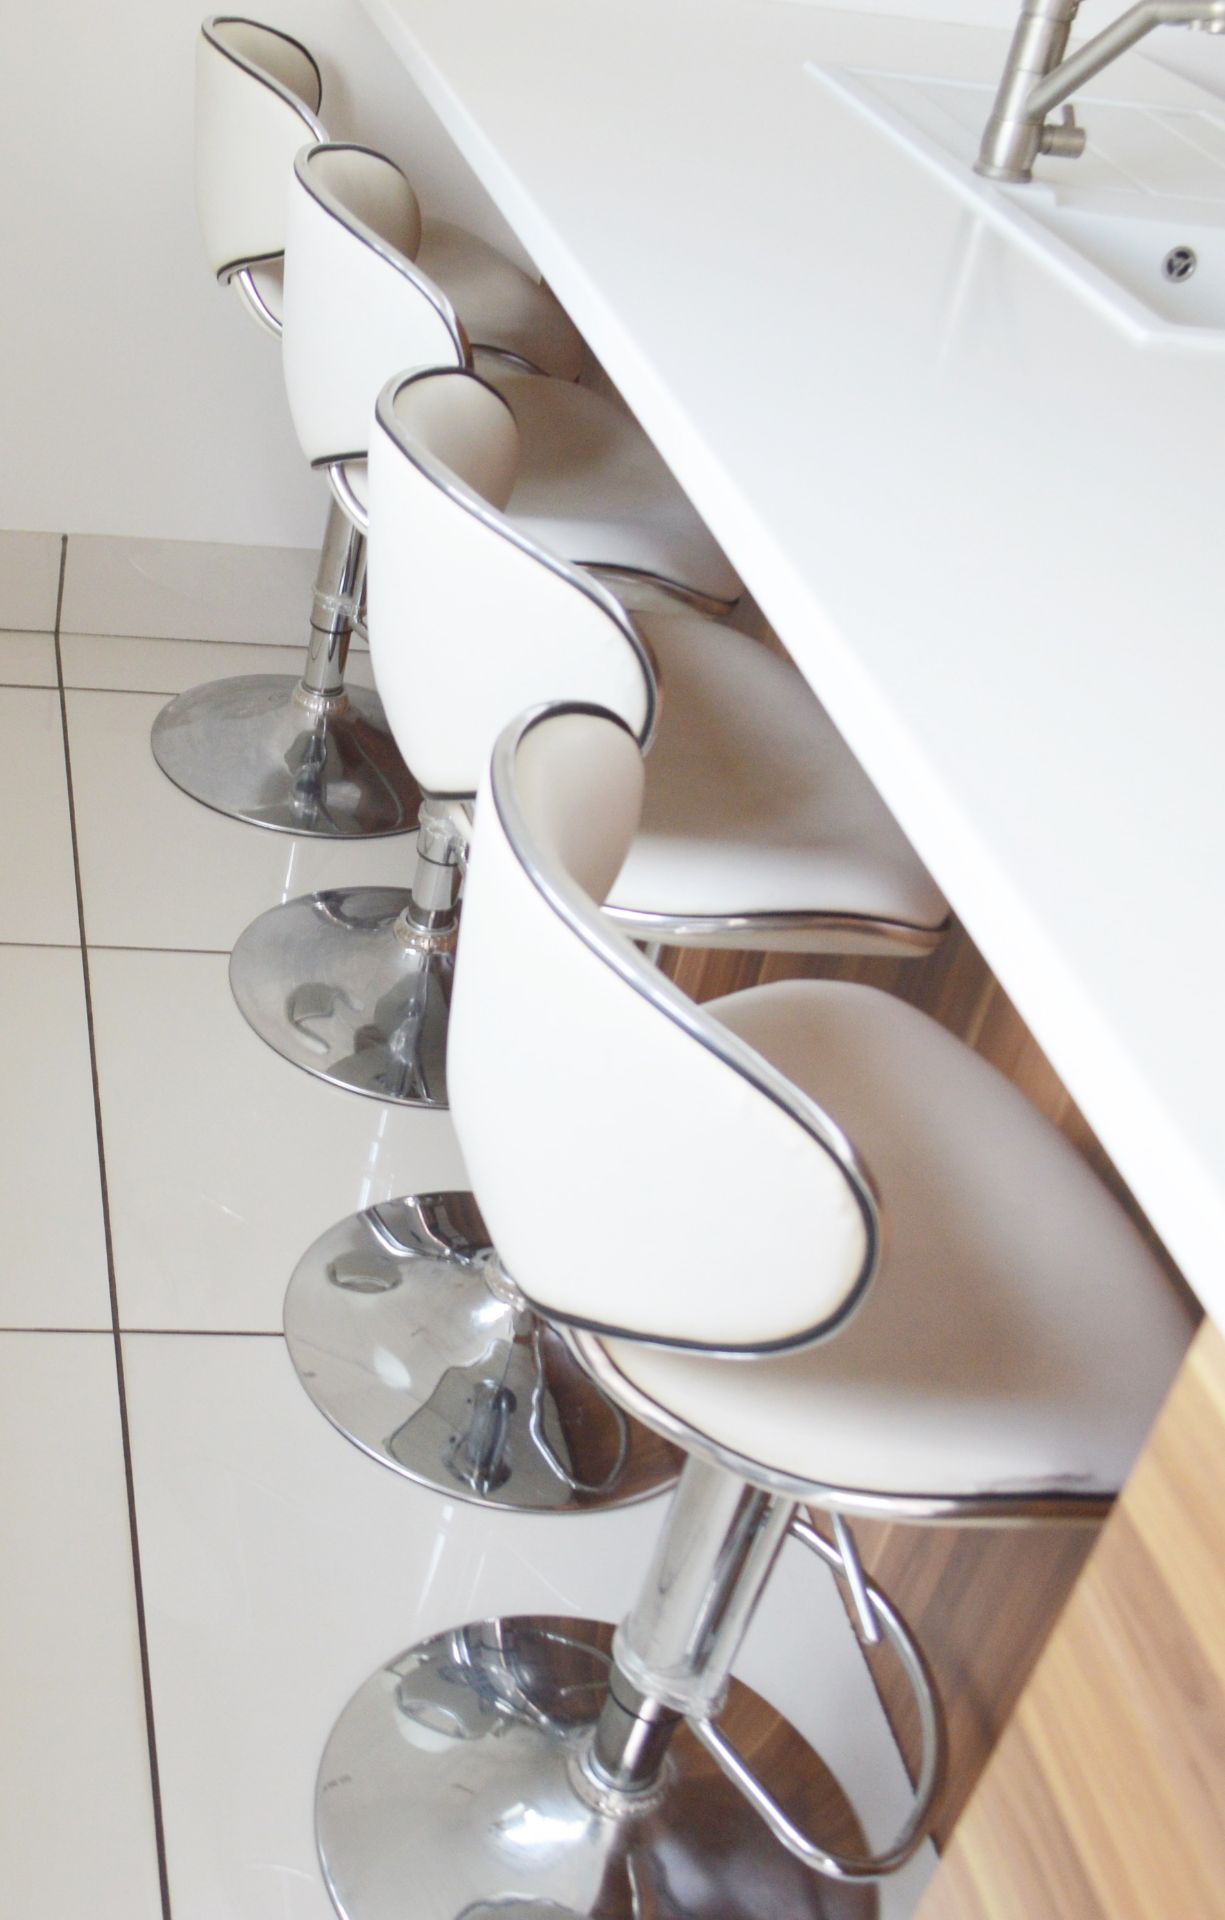 4 x Deluxe Modern White Bar Stools - CL685 - Location: Blackburn BB6 - NO VAT On Hammer This Lot - Image 3 of 4